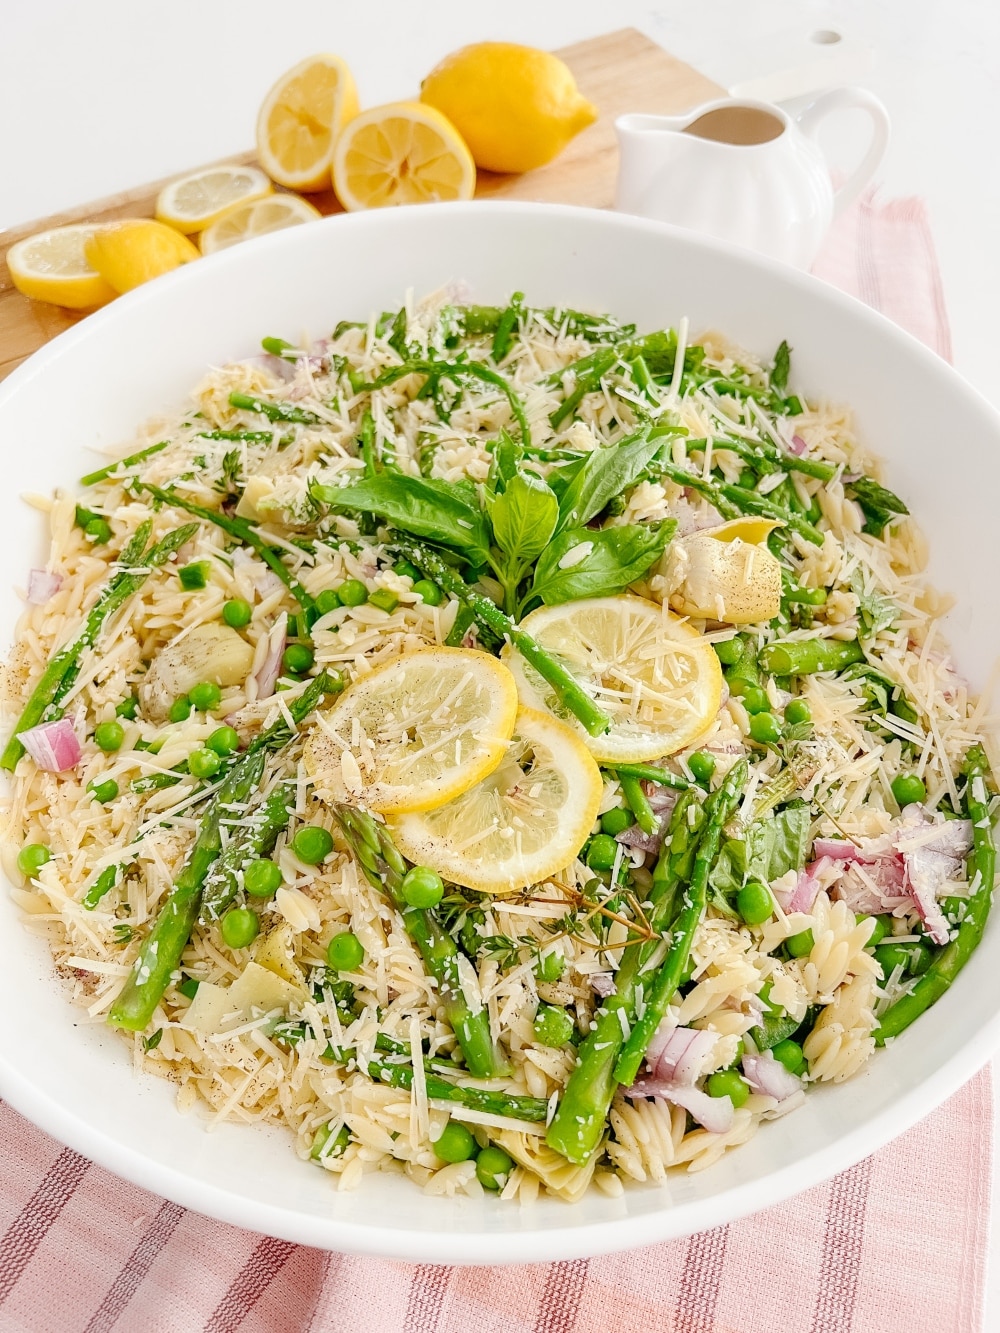 Lemon Orzo Pasta Salad. Celebrate warmer weather with this fresh orzo salad filled with summer vegetables and a fresh and light lemon herb vinaigrette dressing.